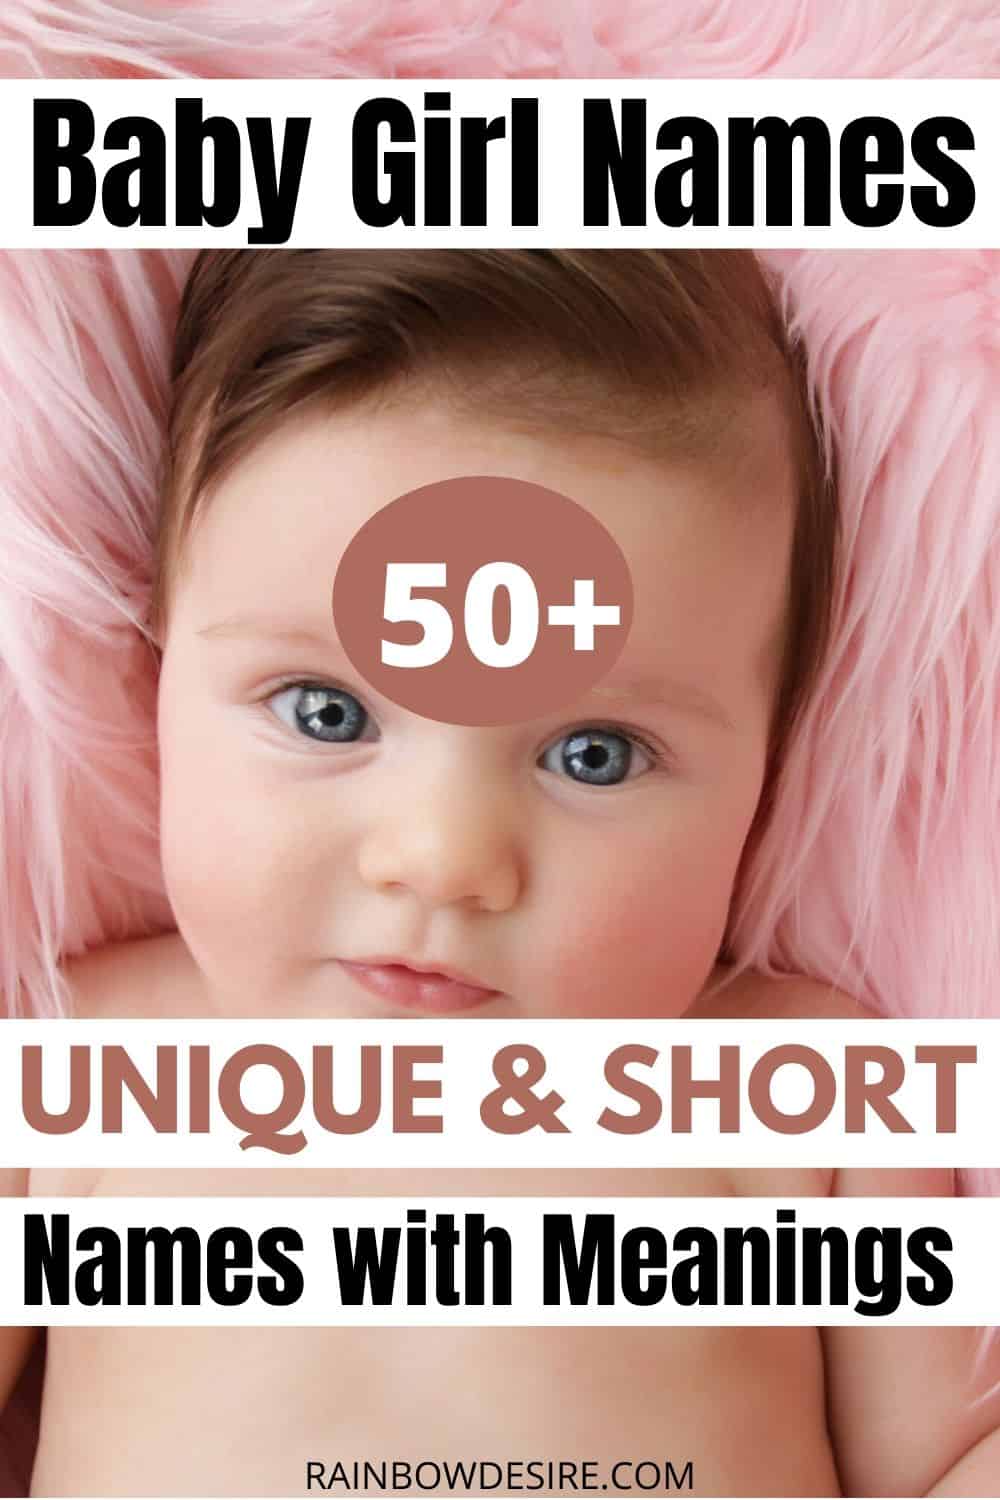 70+ Unique Baby Girl Names and what they mean - Rainbow Desire